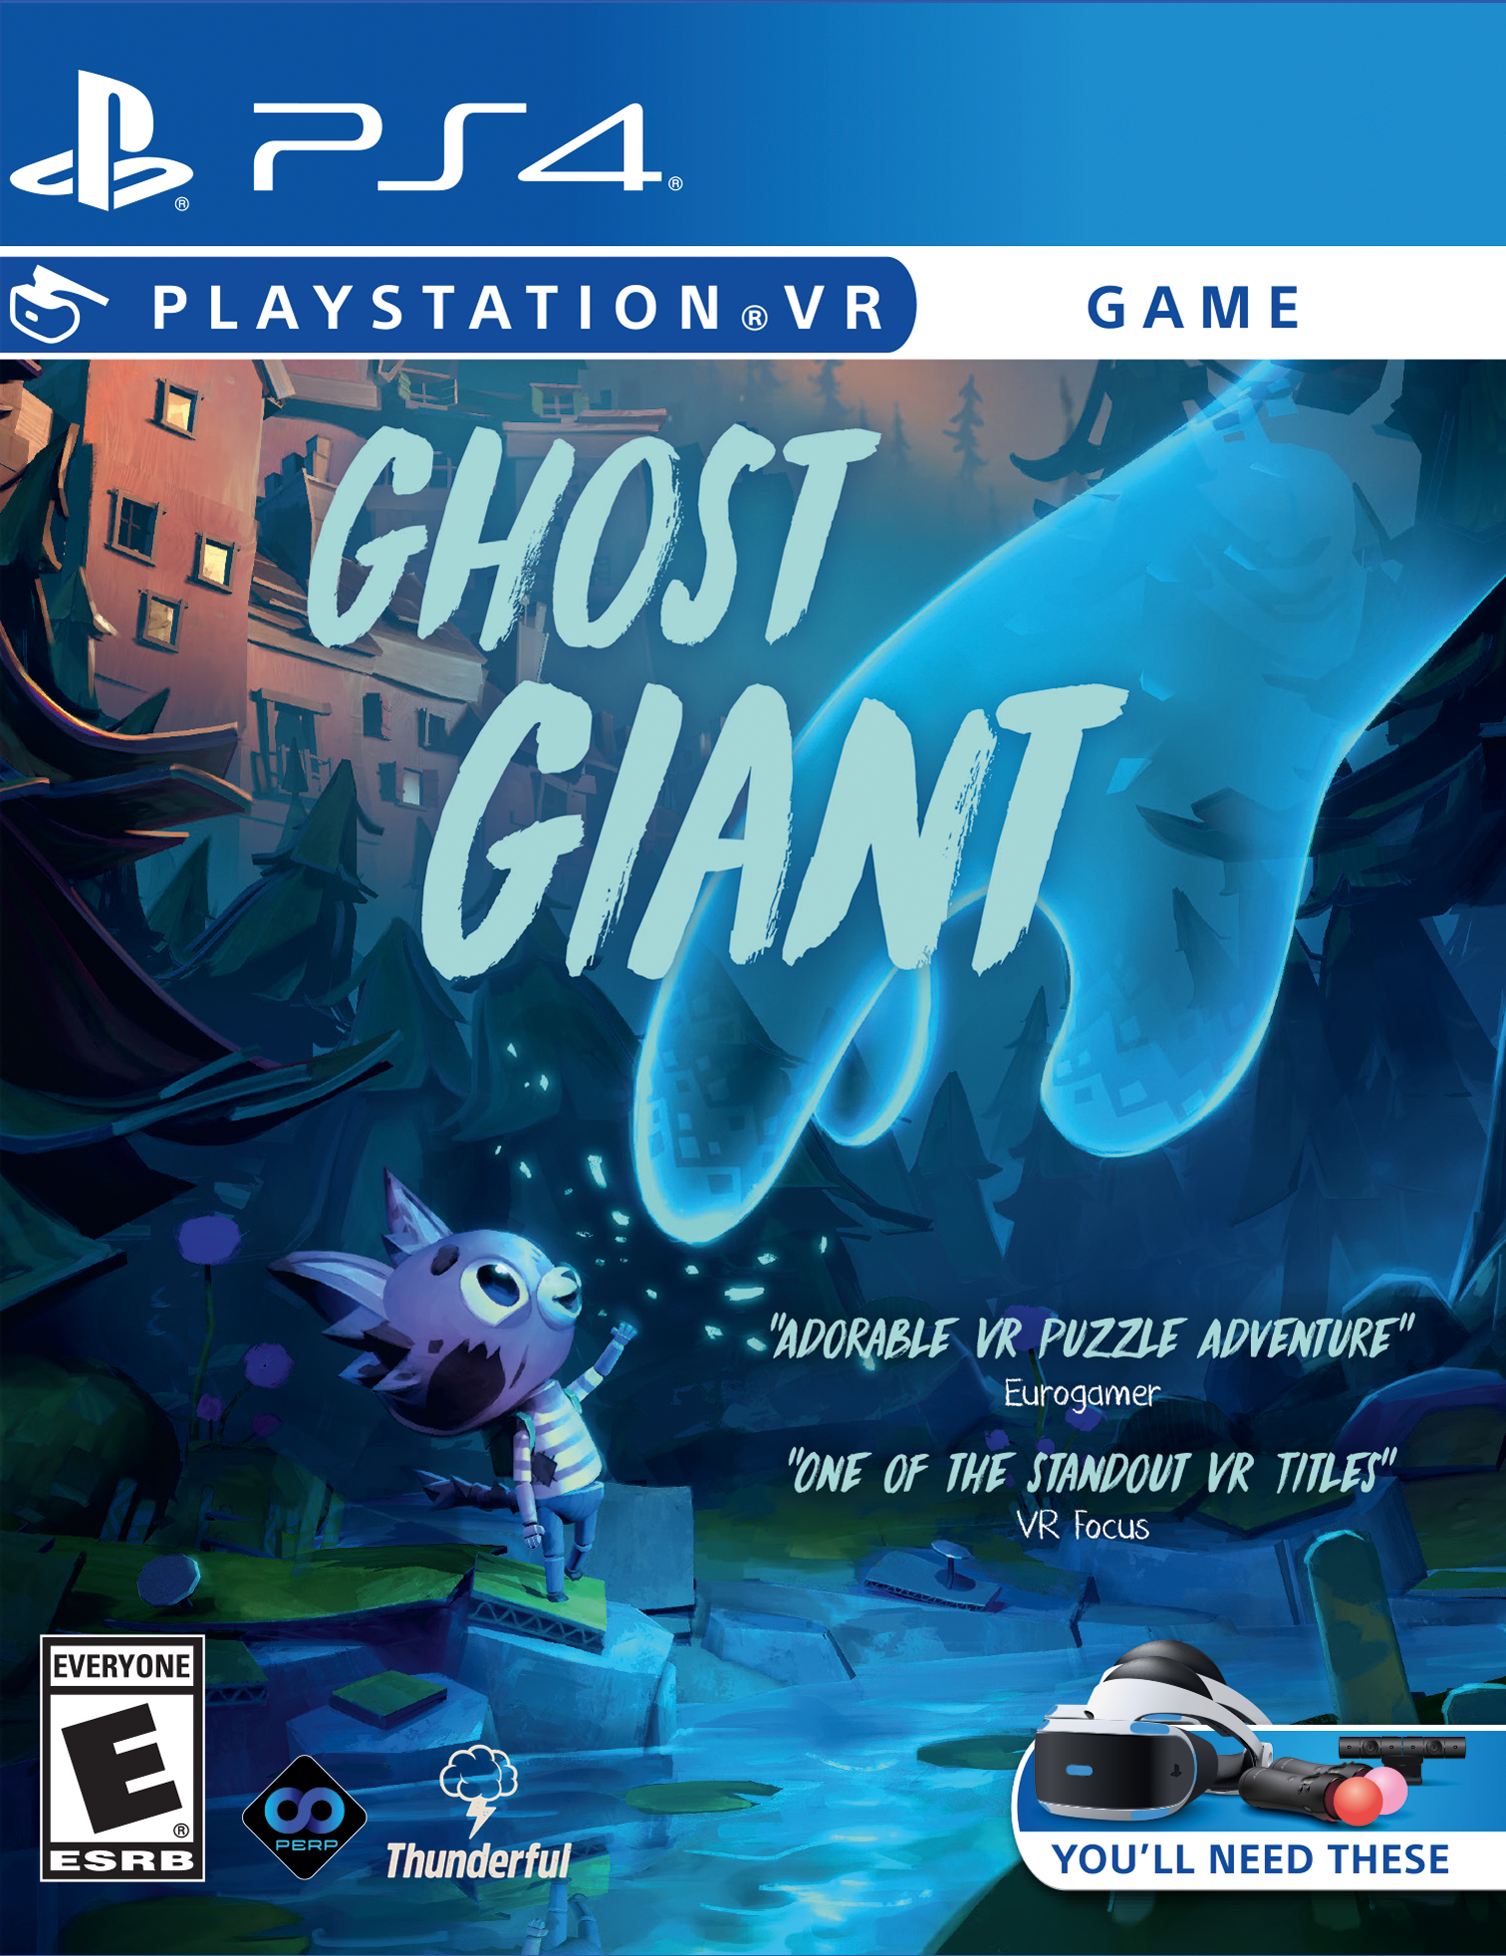 ghost giant game download free